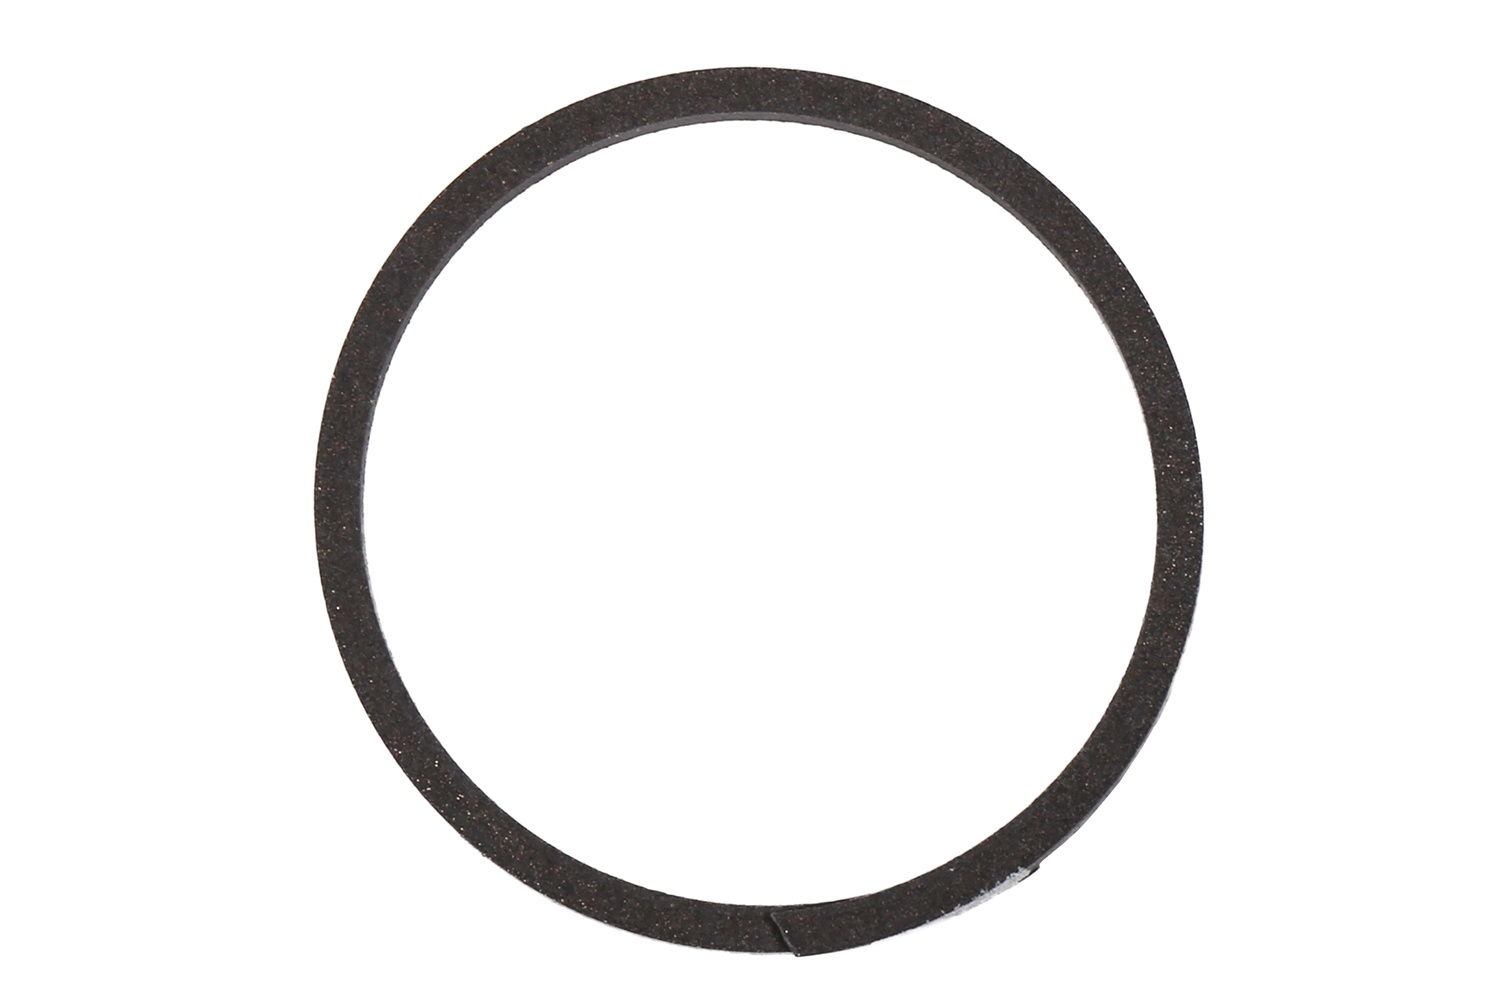 GM GENUINE PARTS - Engine Camshaft Seal Ring - GMP 12636316